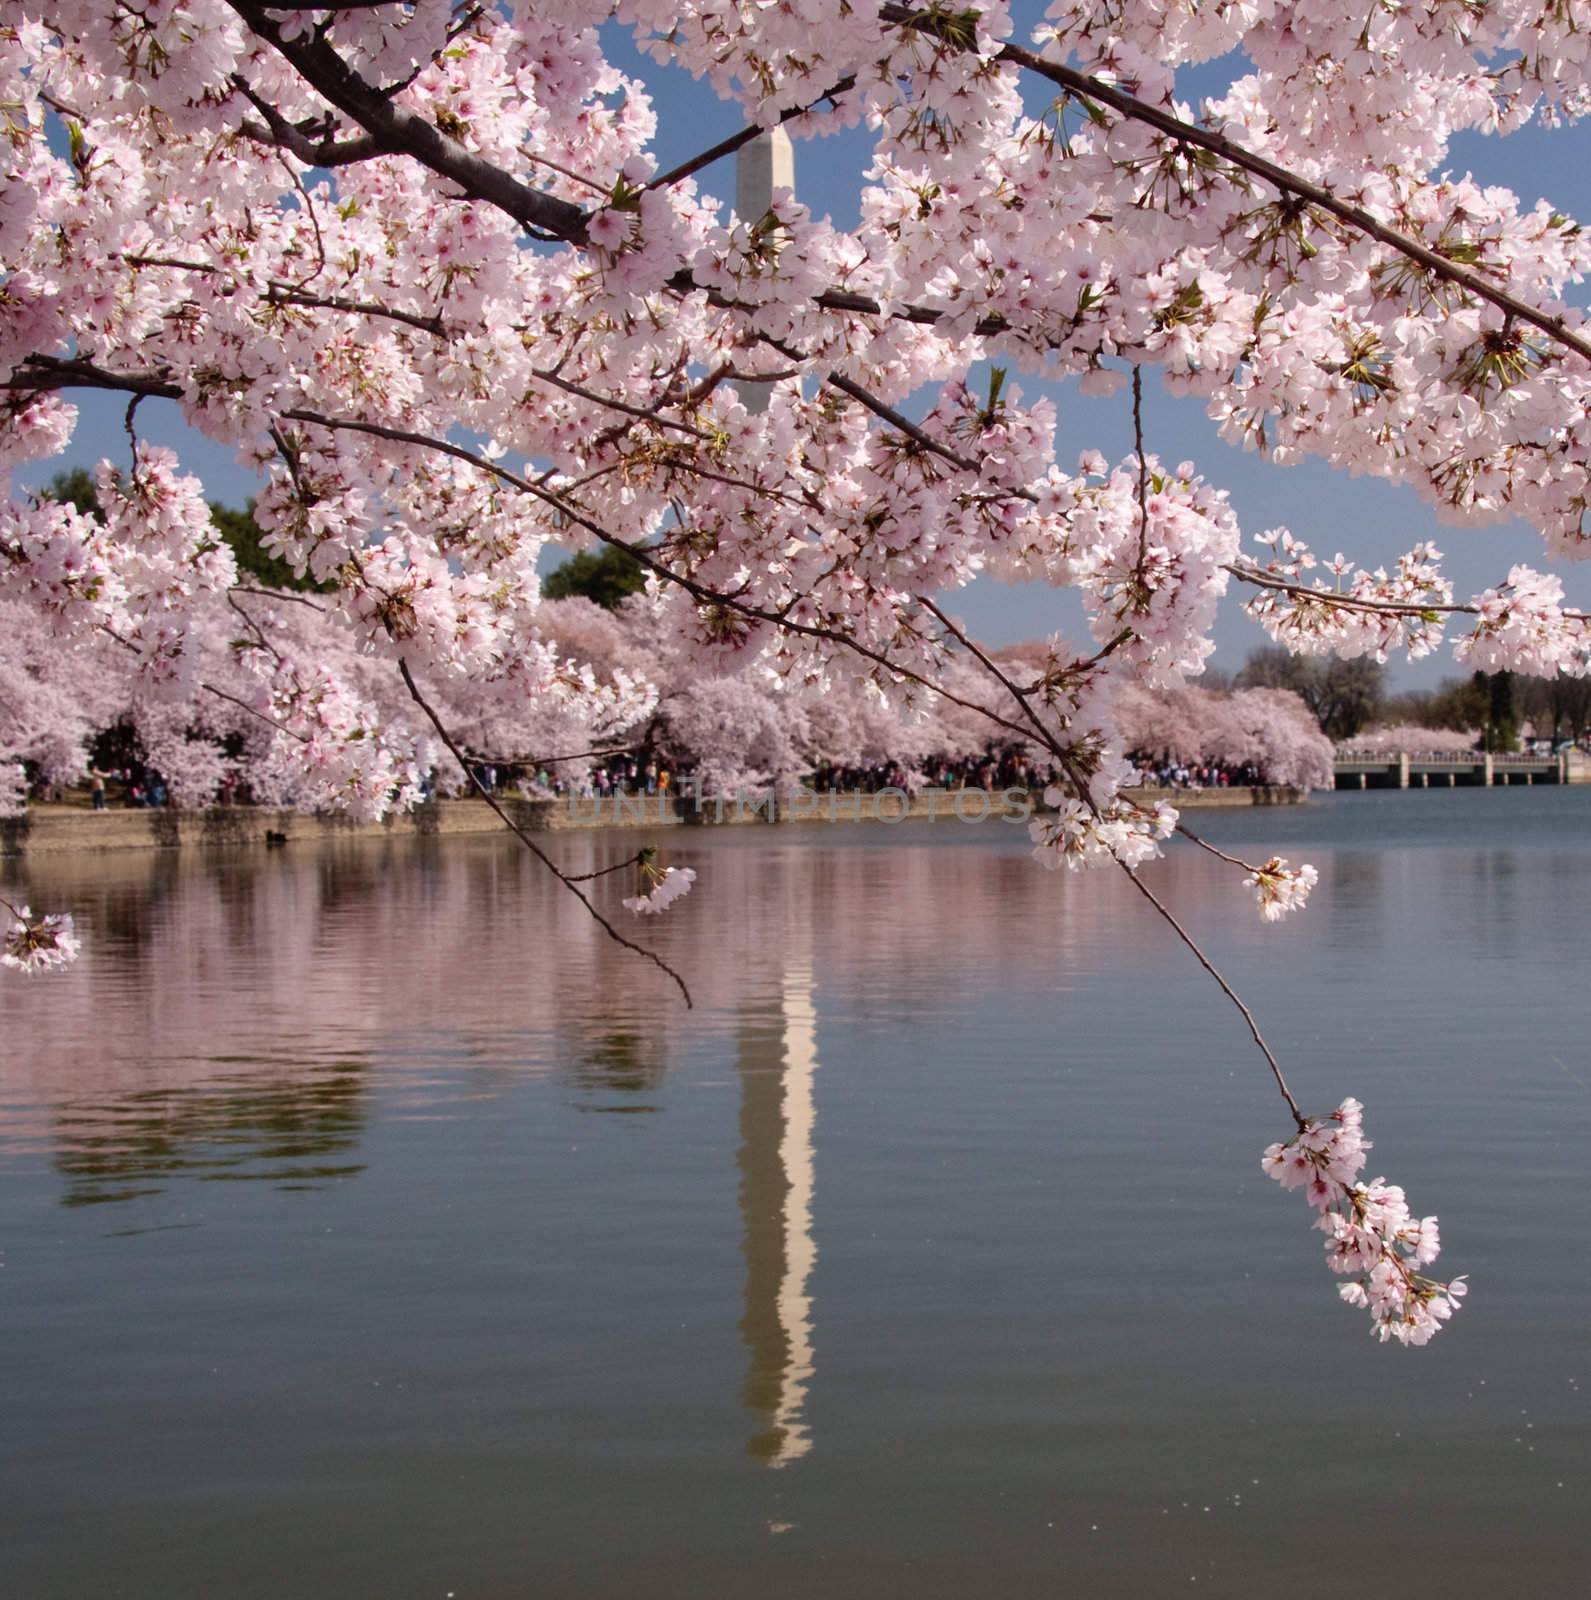 Cherry blossoms dominate the scene allowing only the reflection of the Washington Monument to be seen